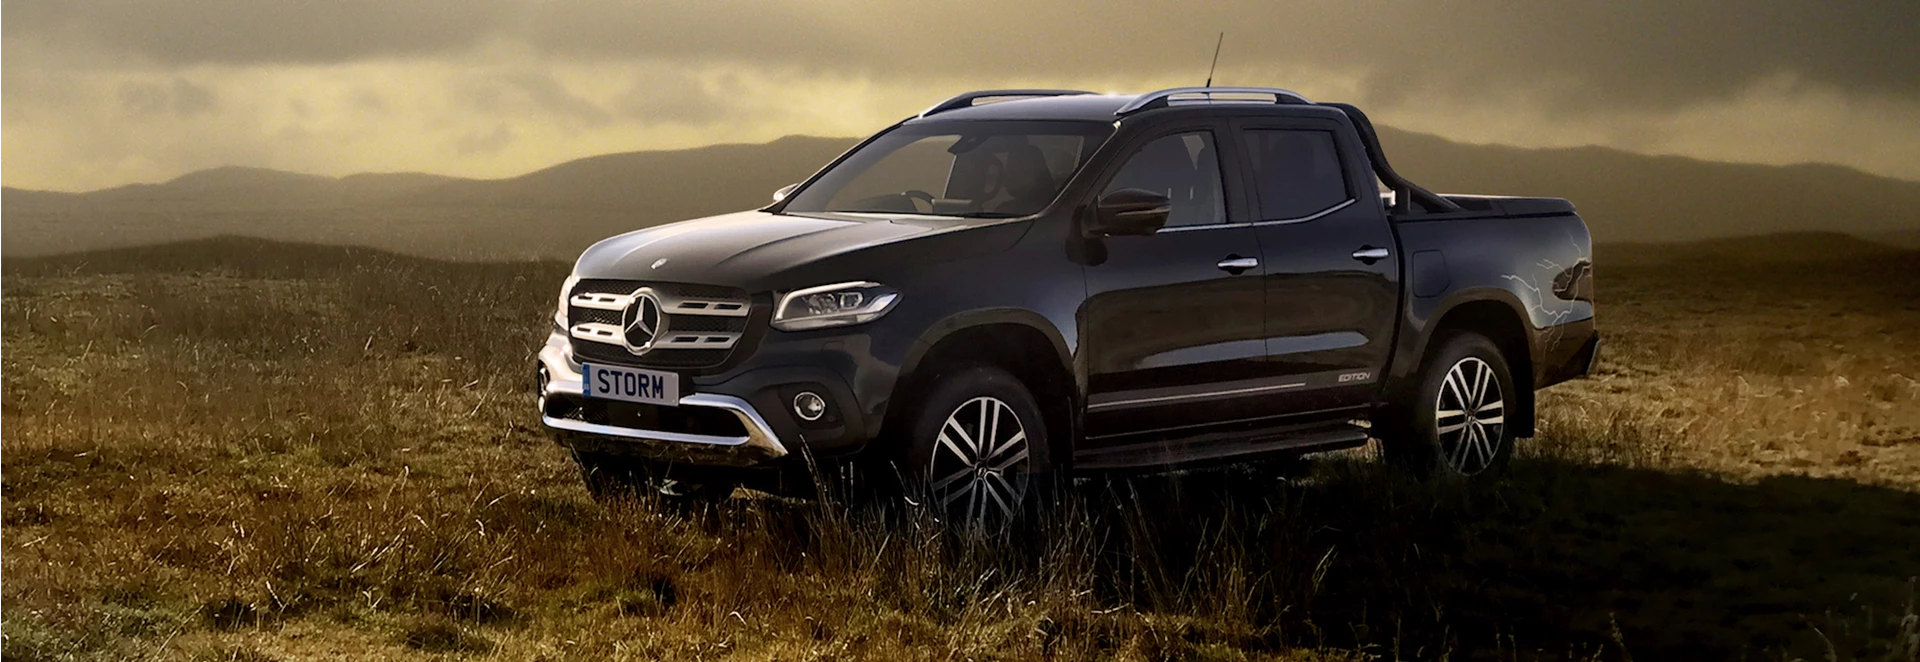 Mercedes reveals X-Class Storm Edition for Black Friday